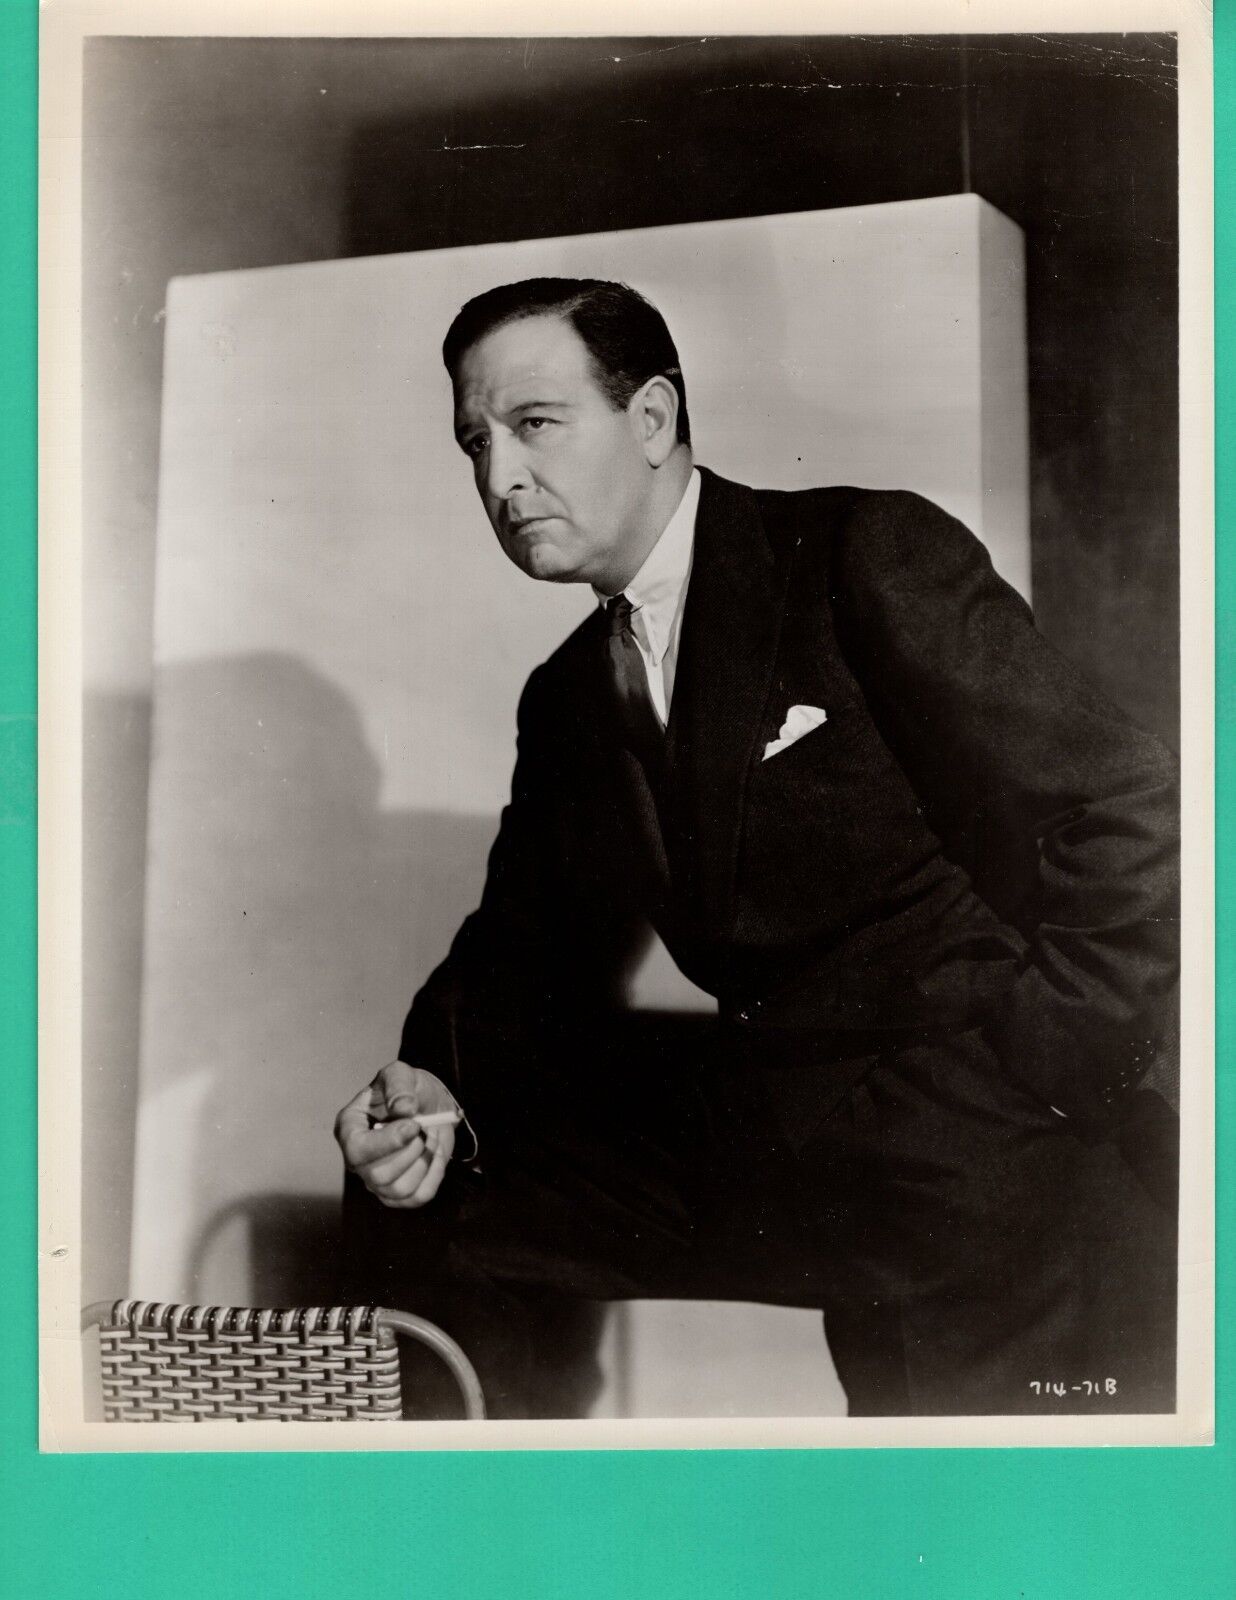 CONWAY TEARLE Movie Star Actor Promo 1930's Vintage Photo Poster painting 8x10